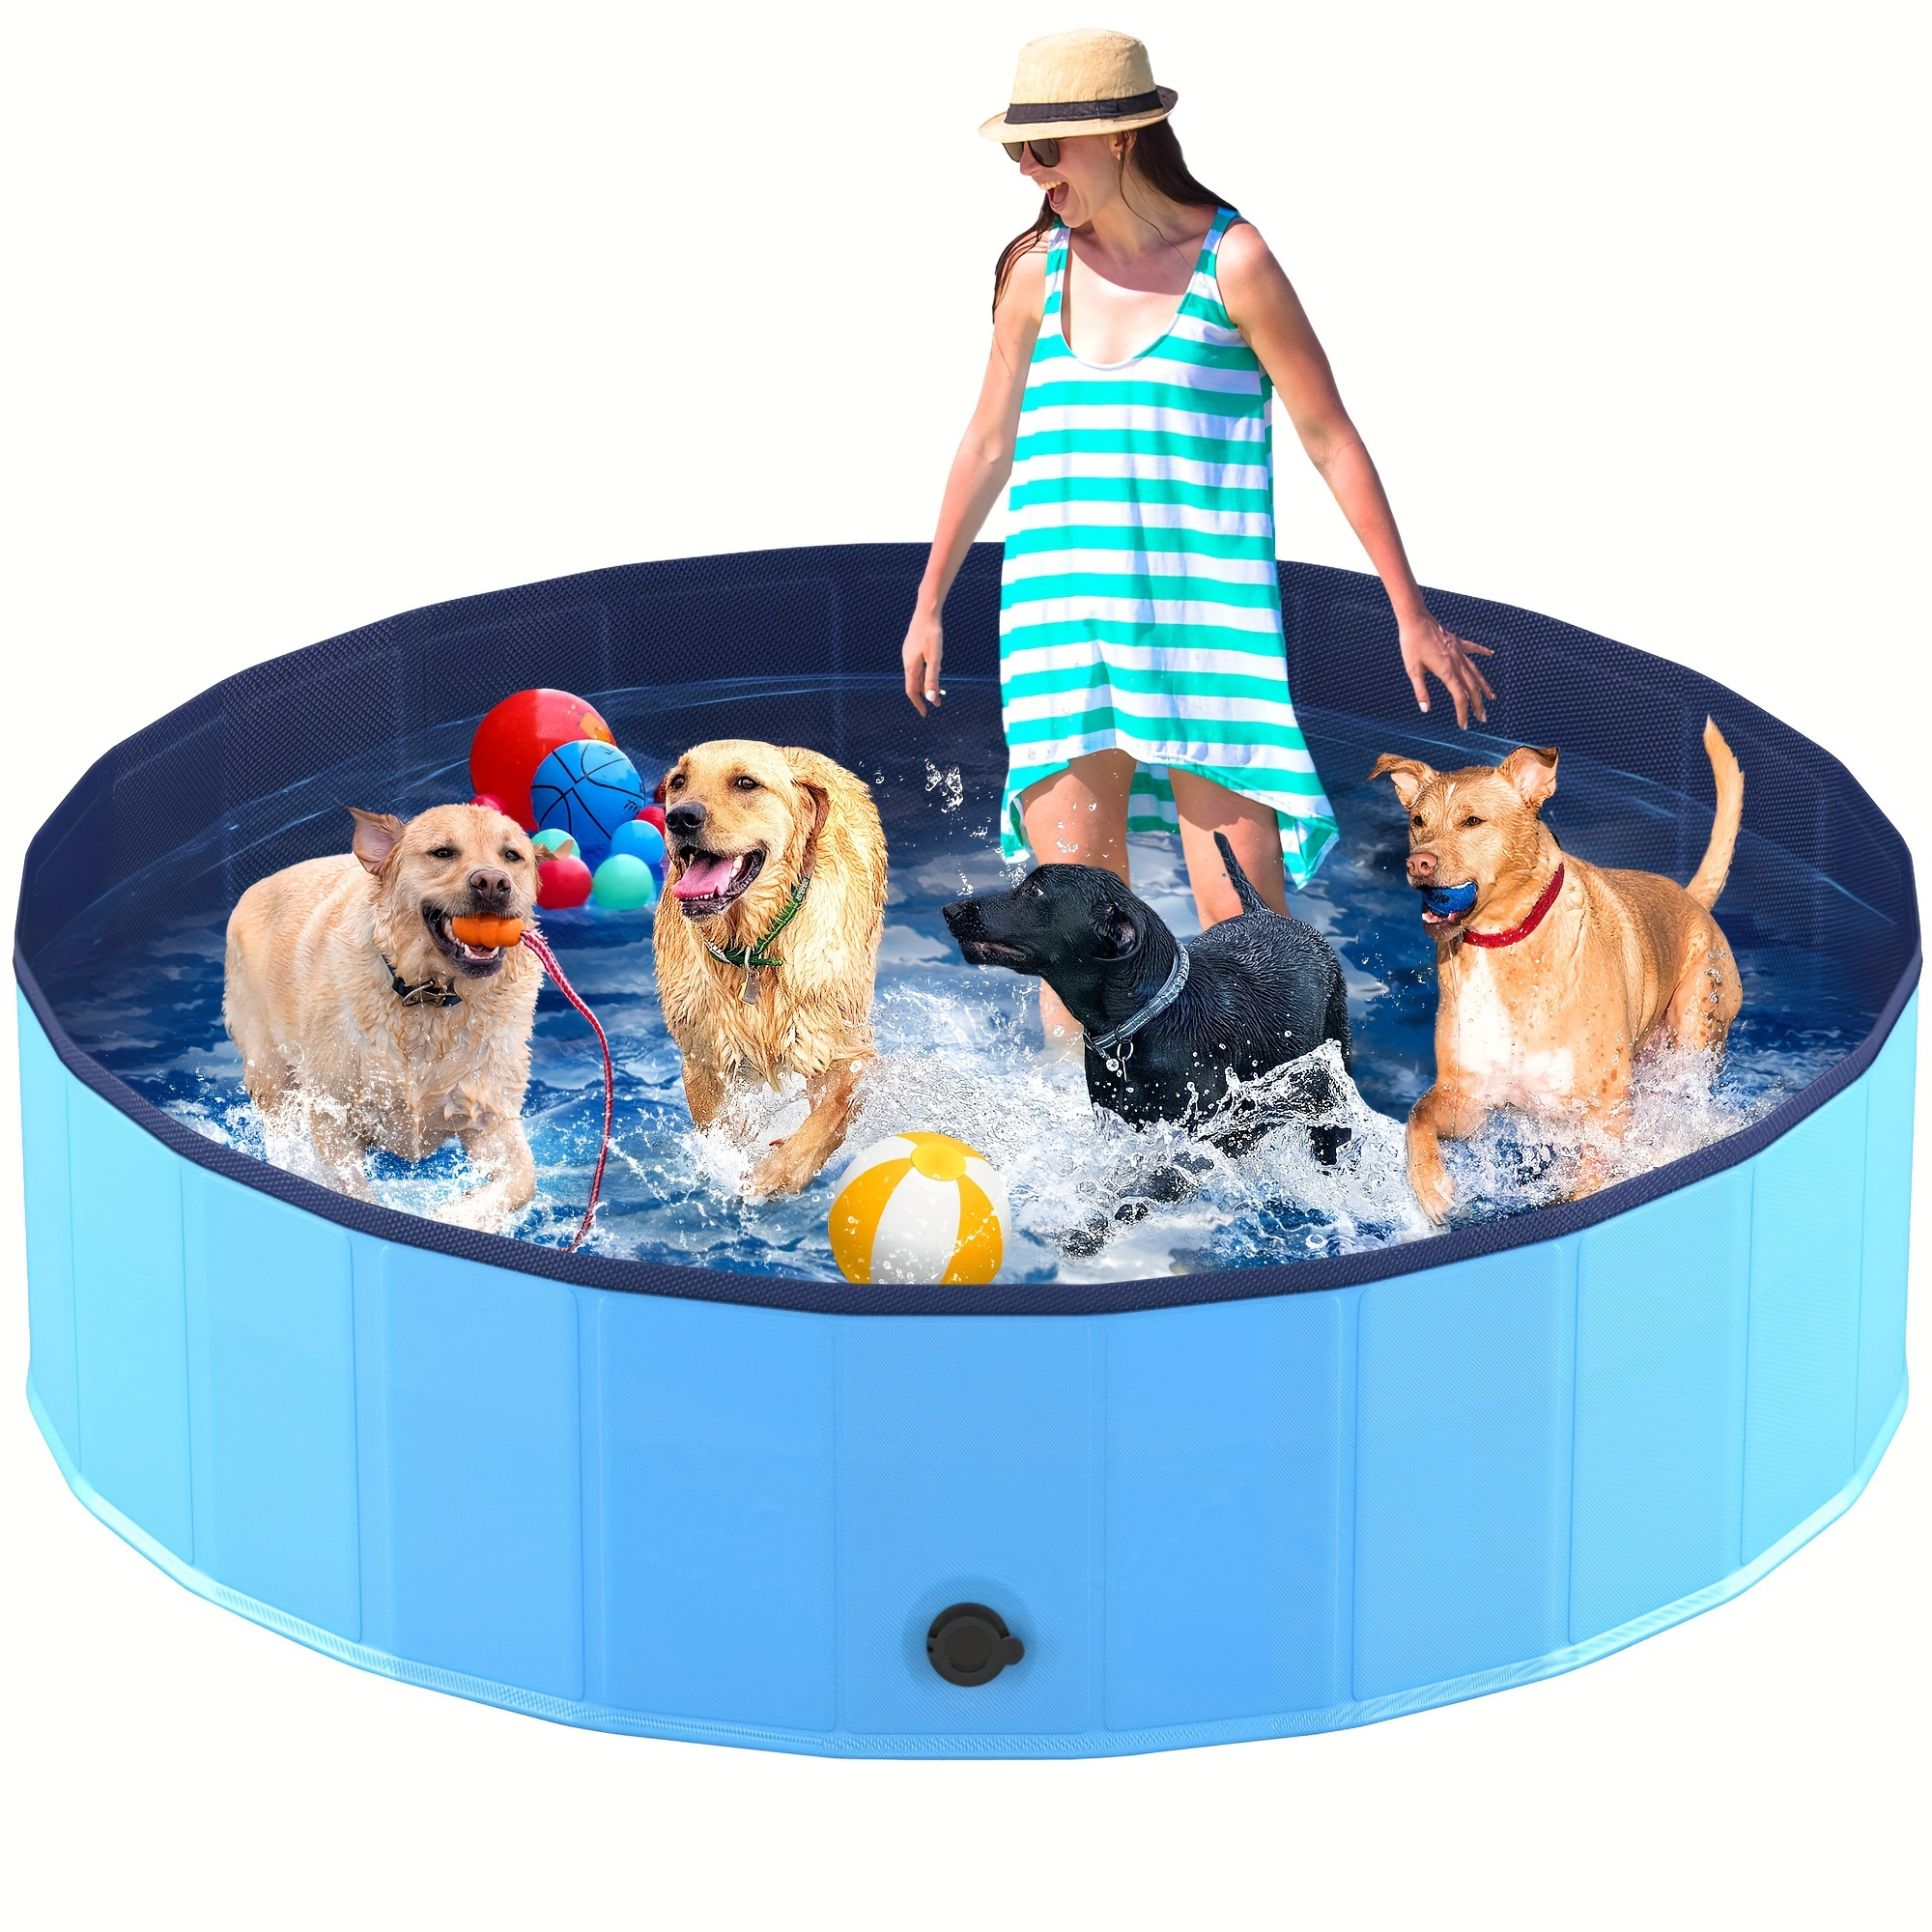 

Niubya Foldable Dog Pool, Collapsible Hard Plastic Dog Swimming Pool, Portable Bath Tub For Pets Dogs And Cats, Pet Wading Pool For Indoor And Outdoor